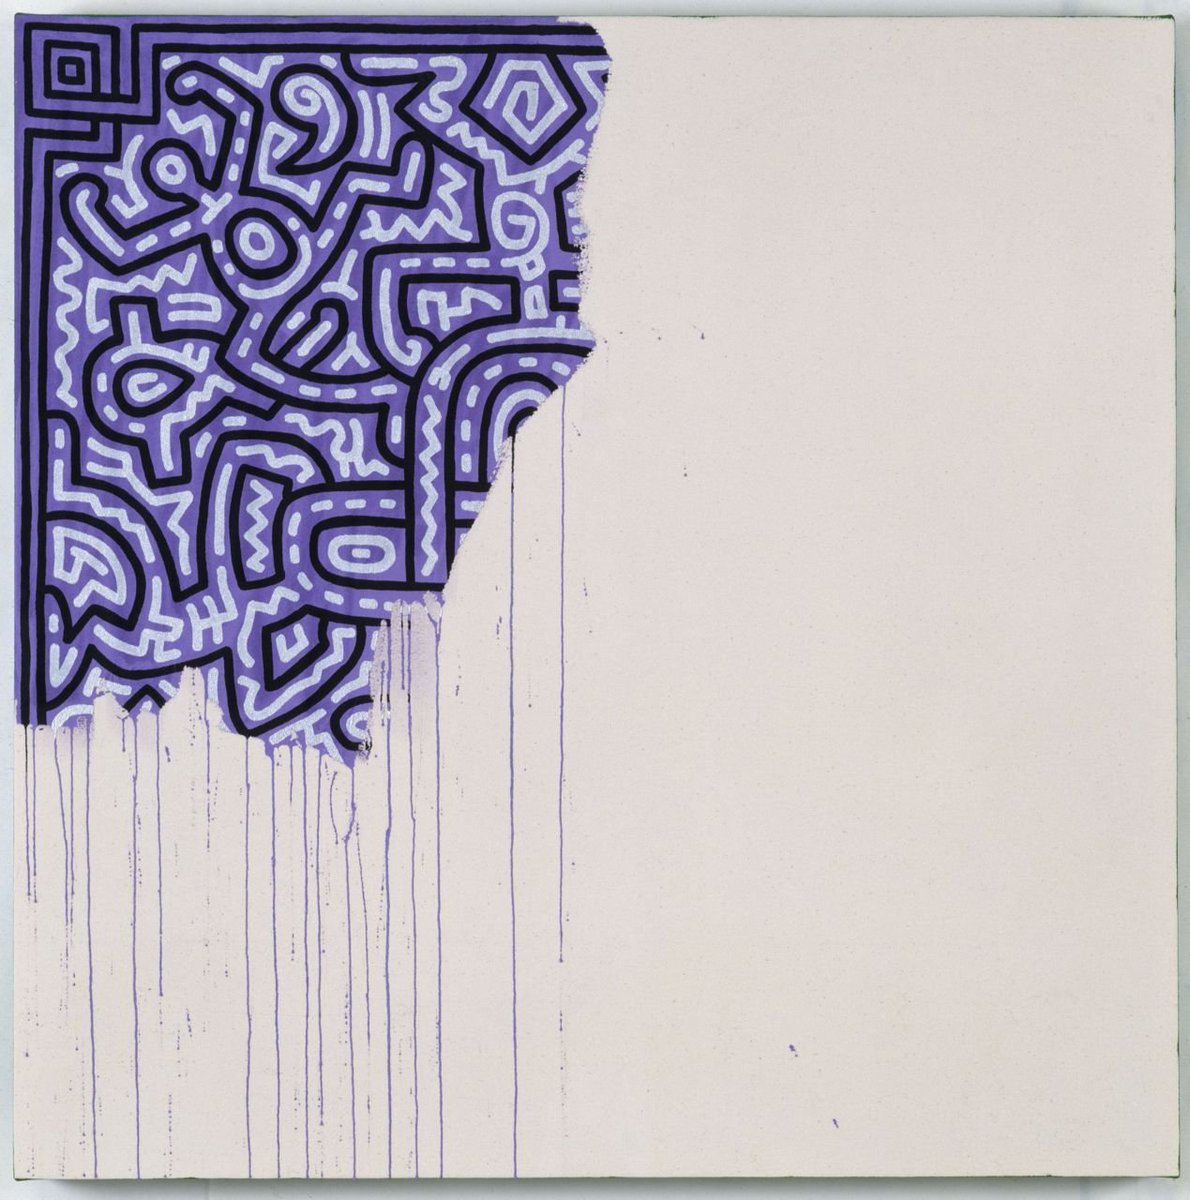 TODAY IN LGBTQ+ HISTORY: On February 16, 1990, artist Keith Haring dies of AIDS at the age of 31. Known for designing the National Coming Out Day logo, below is his less known 'Unfinished Painting,' which he intended to serve as a reminder of his own life being cut short by AIDS.